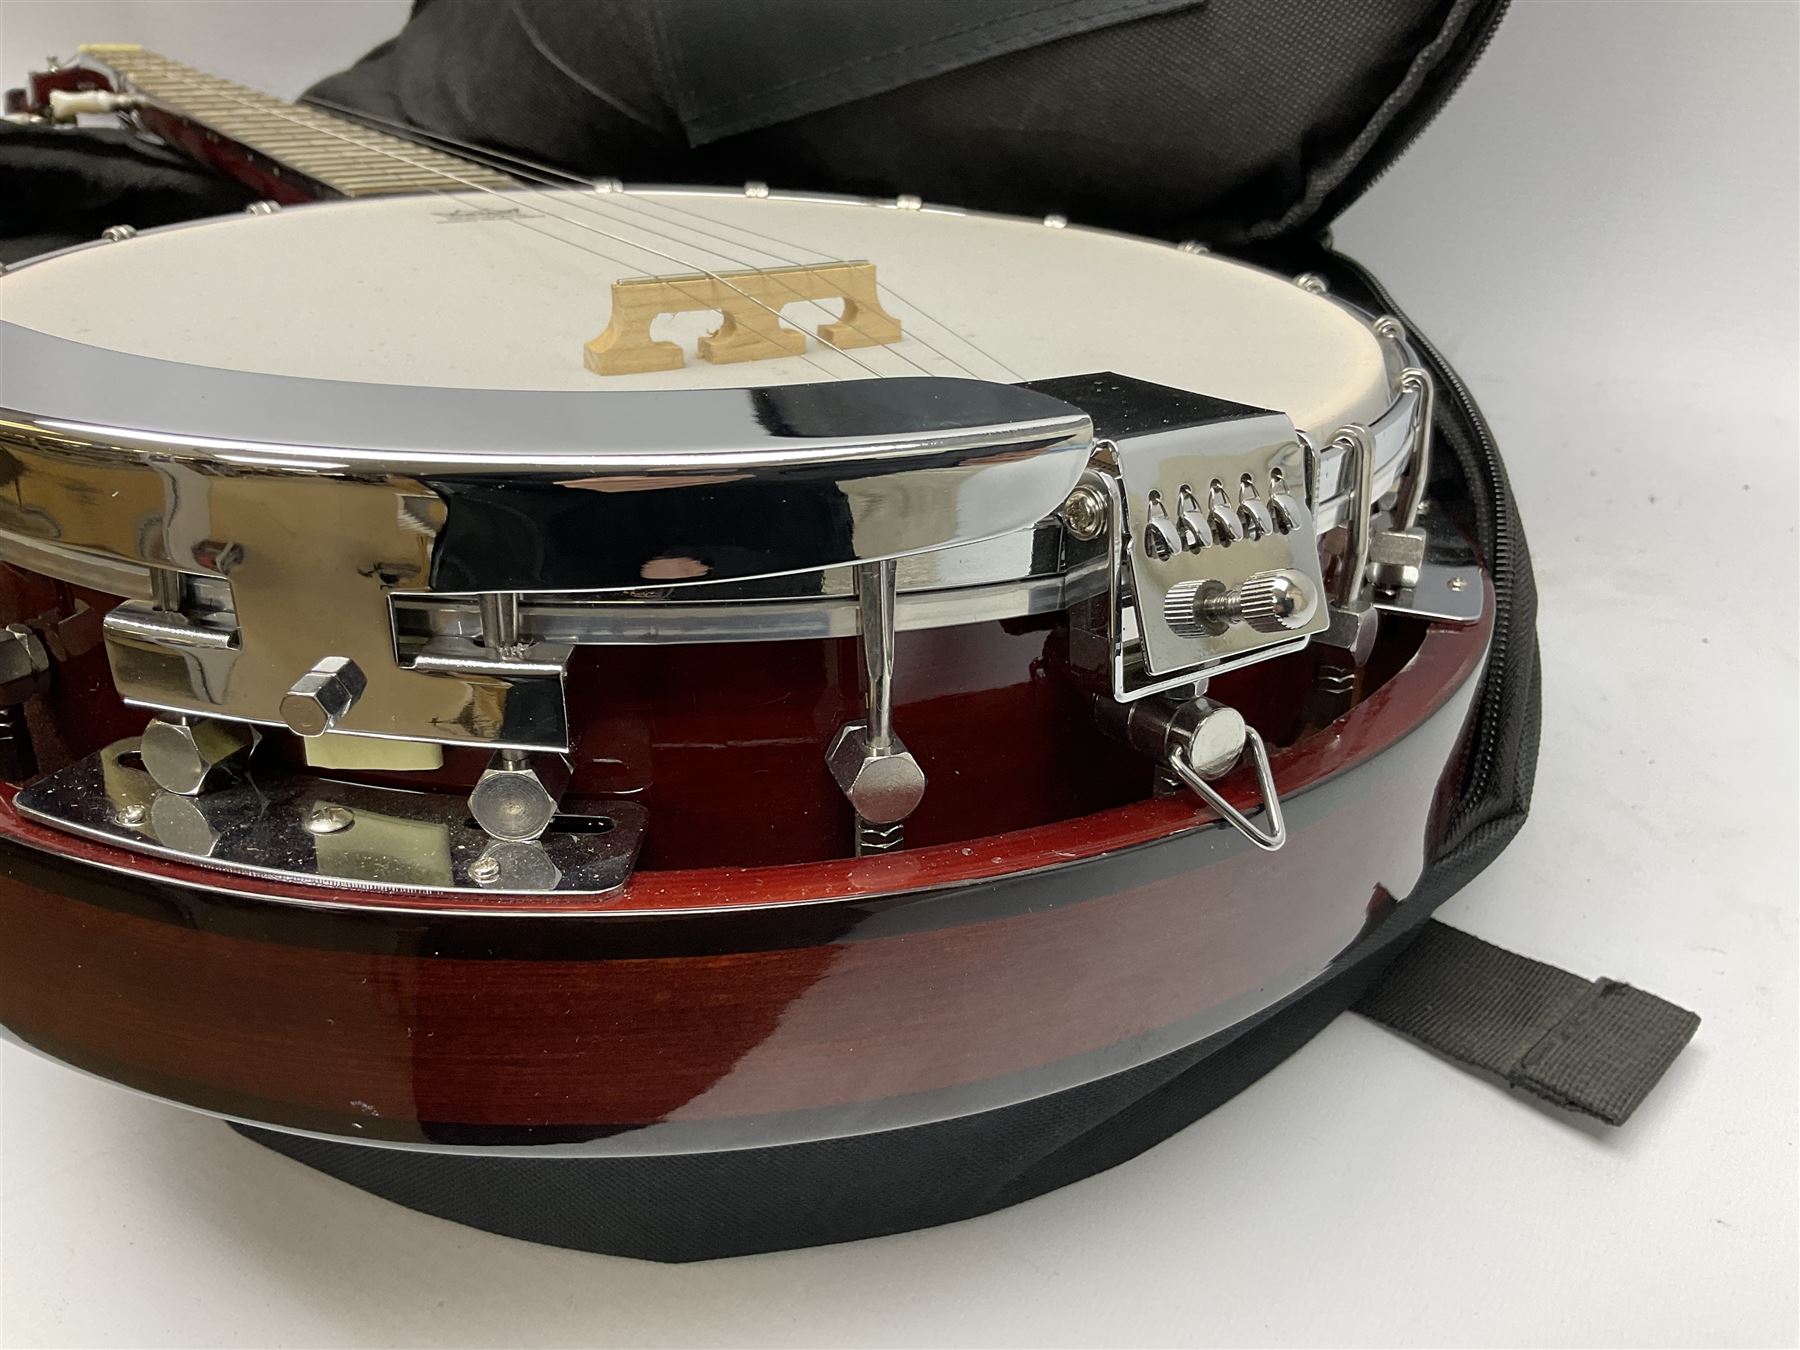 Classic Cantabile five-string banjo with sapele mahogany back L97.5cm; in soft carrying case - Image 8 of 12